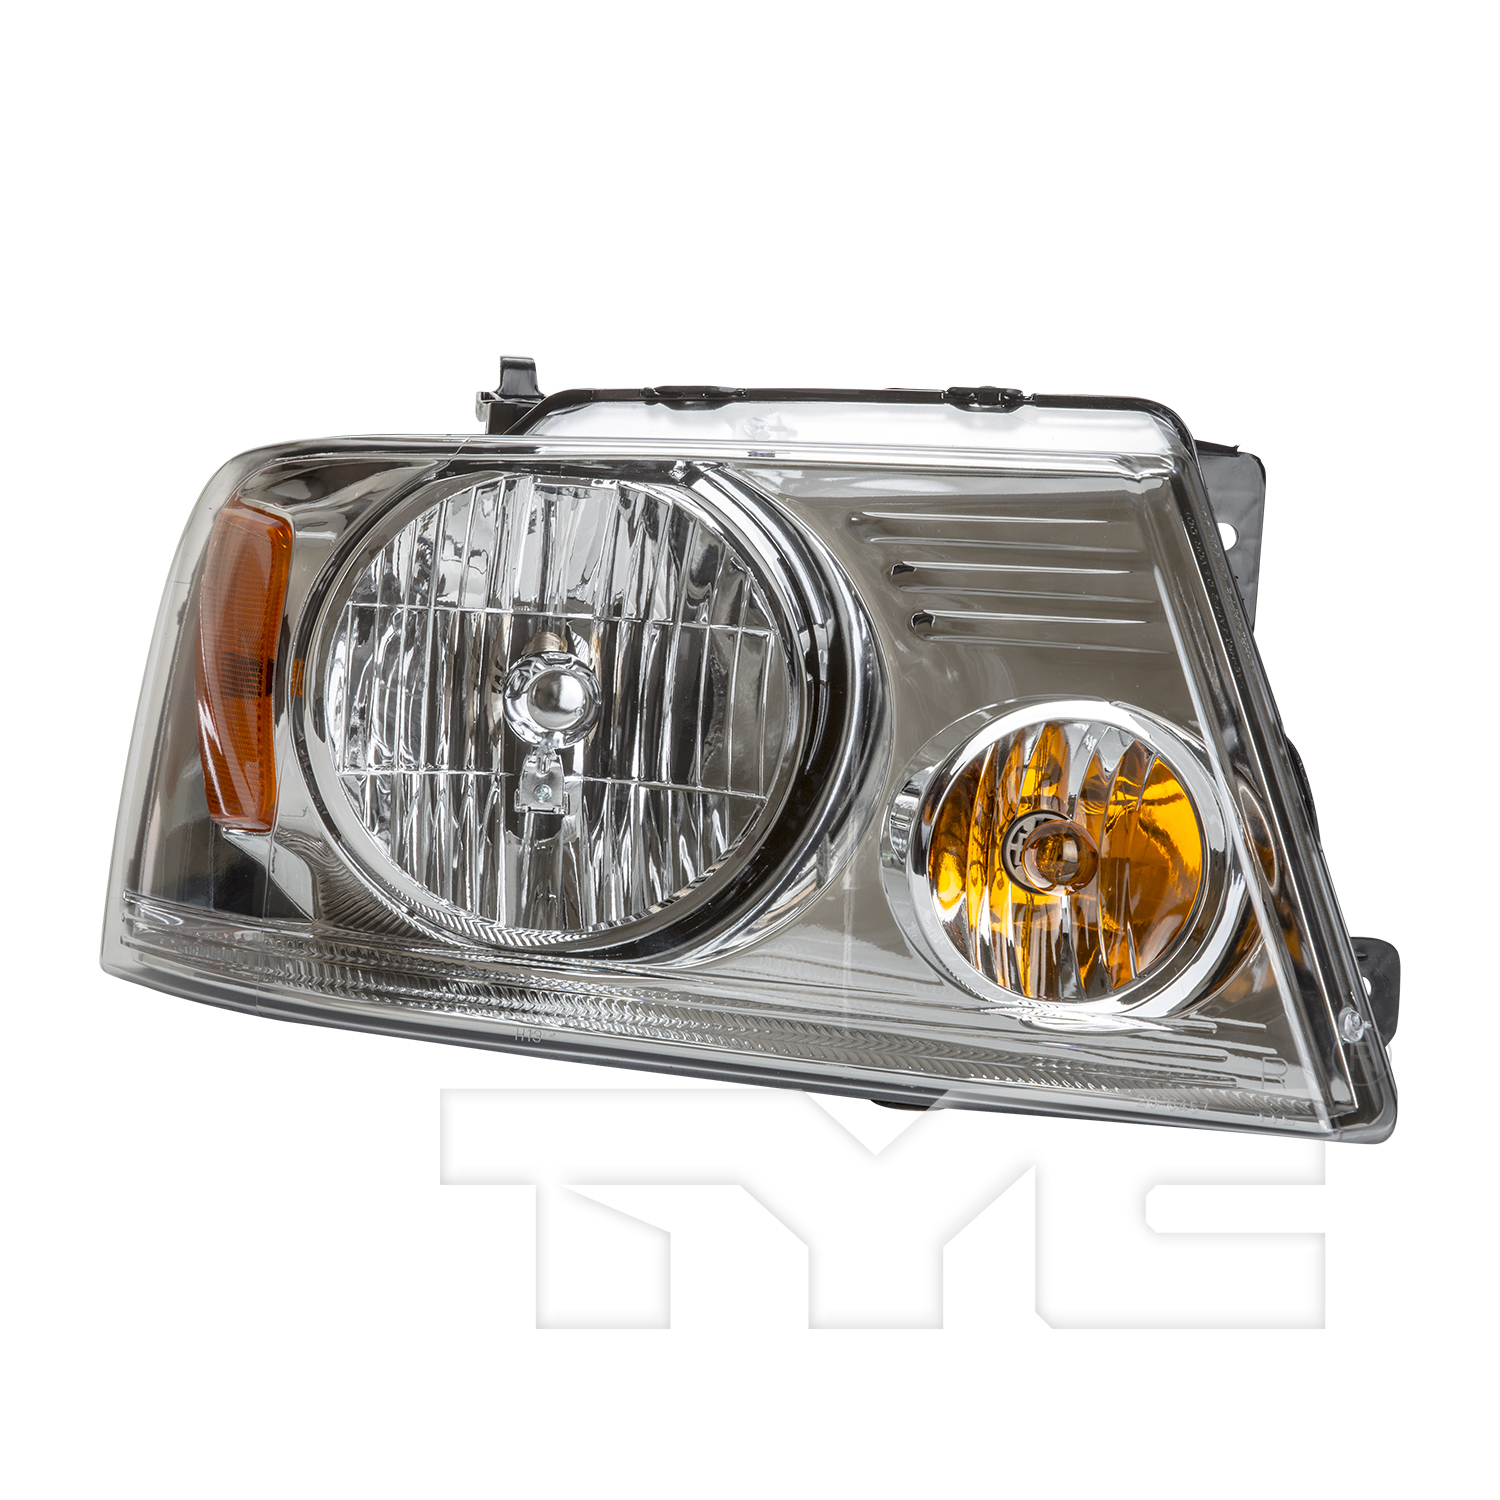 Aftermarket HEADLIGHTS for FORD - F-150, F-150,04-08,RT Headlamp assy composite